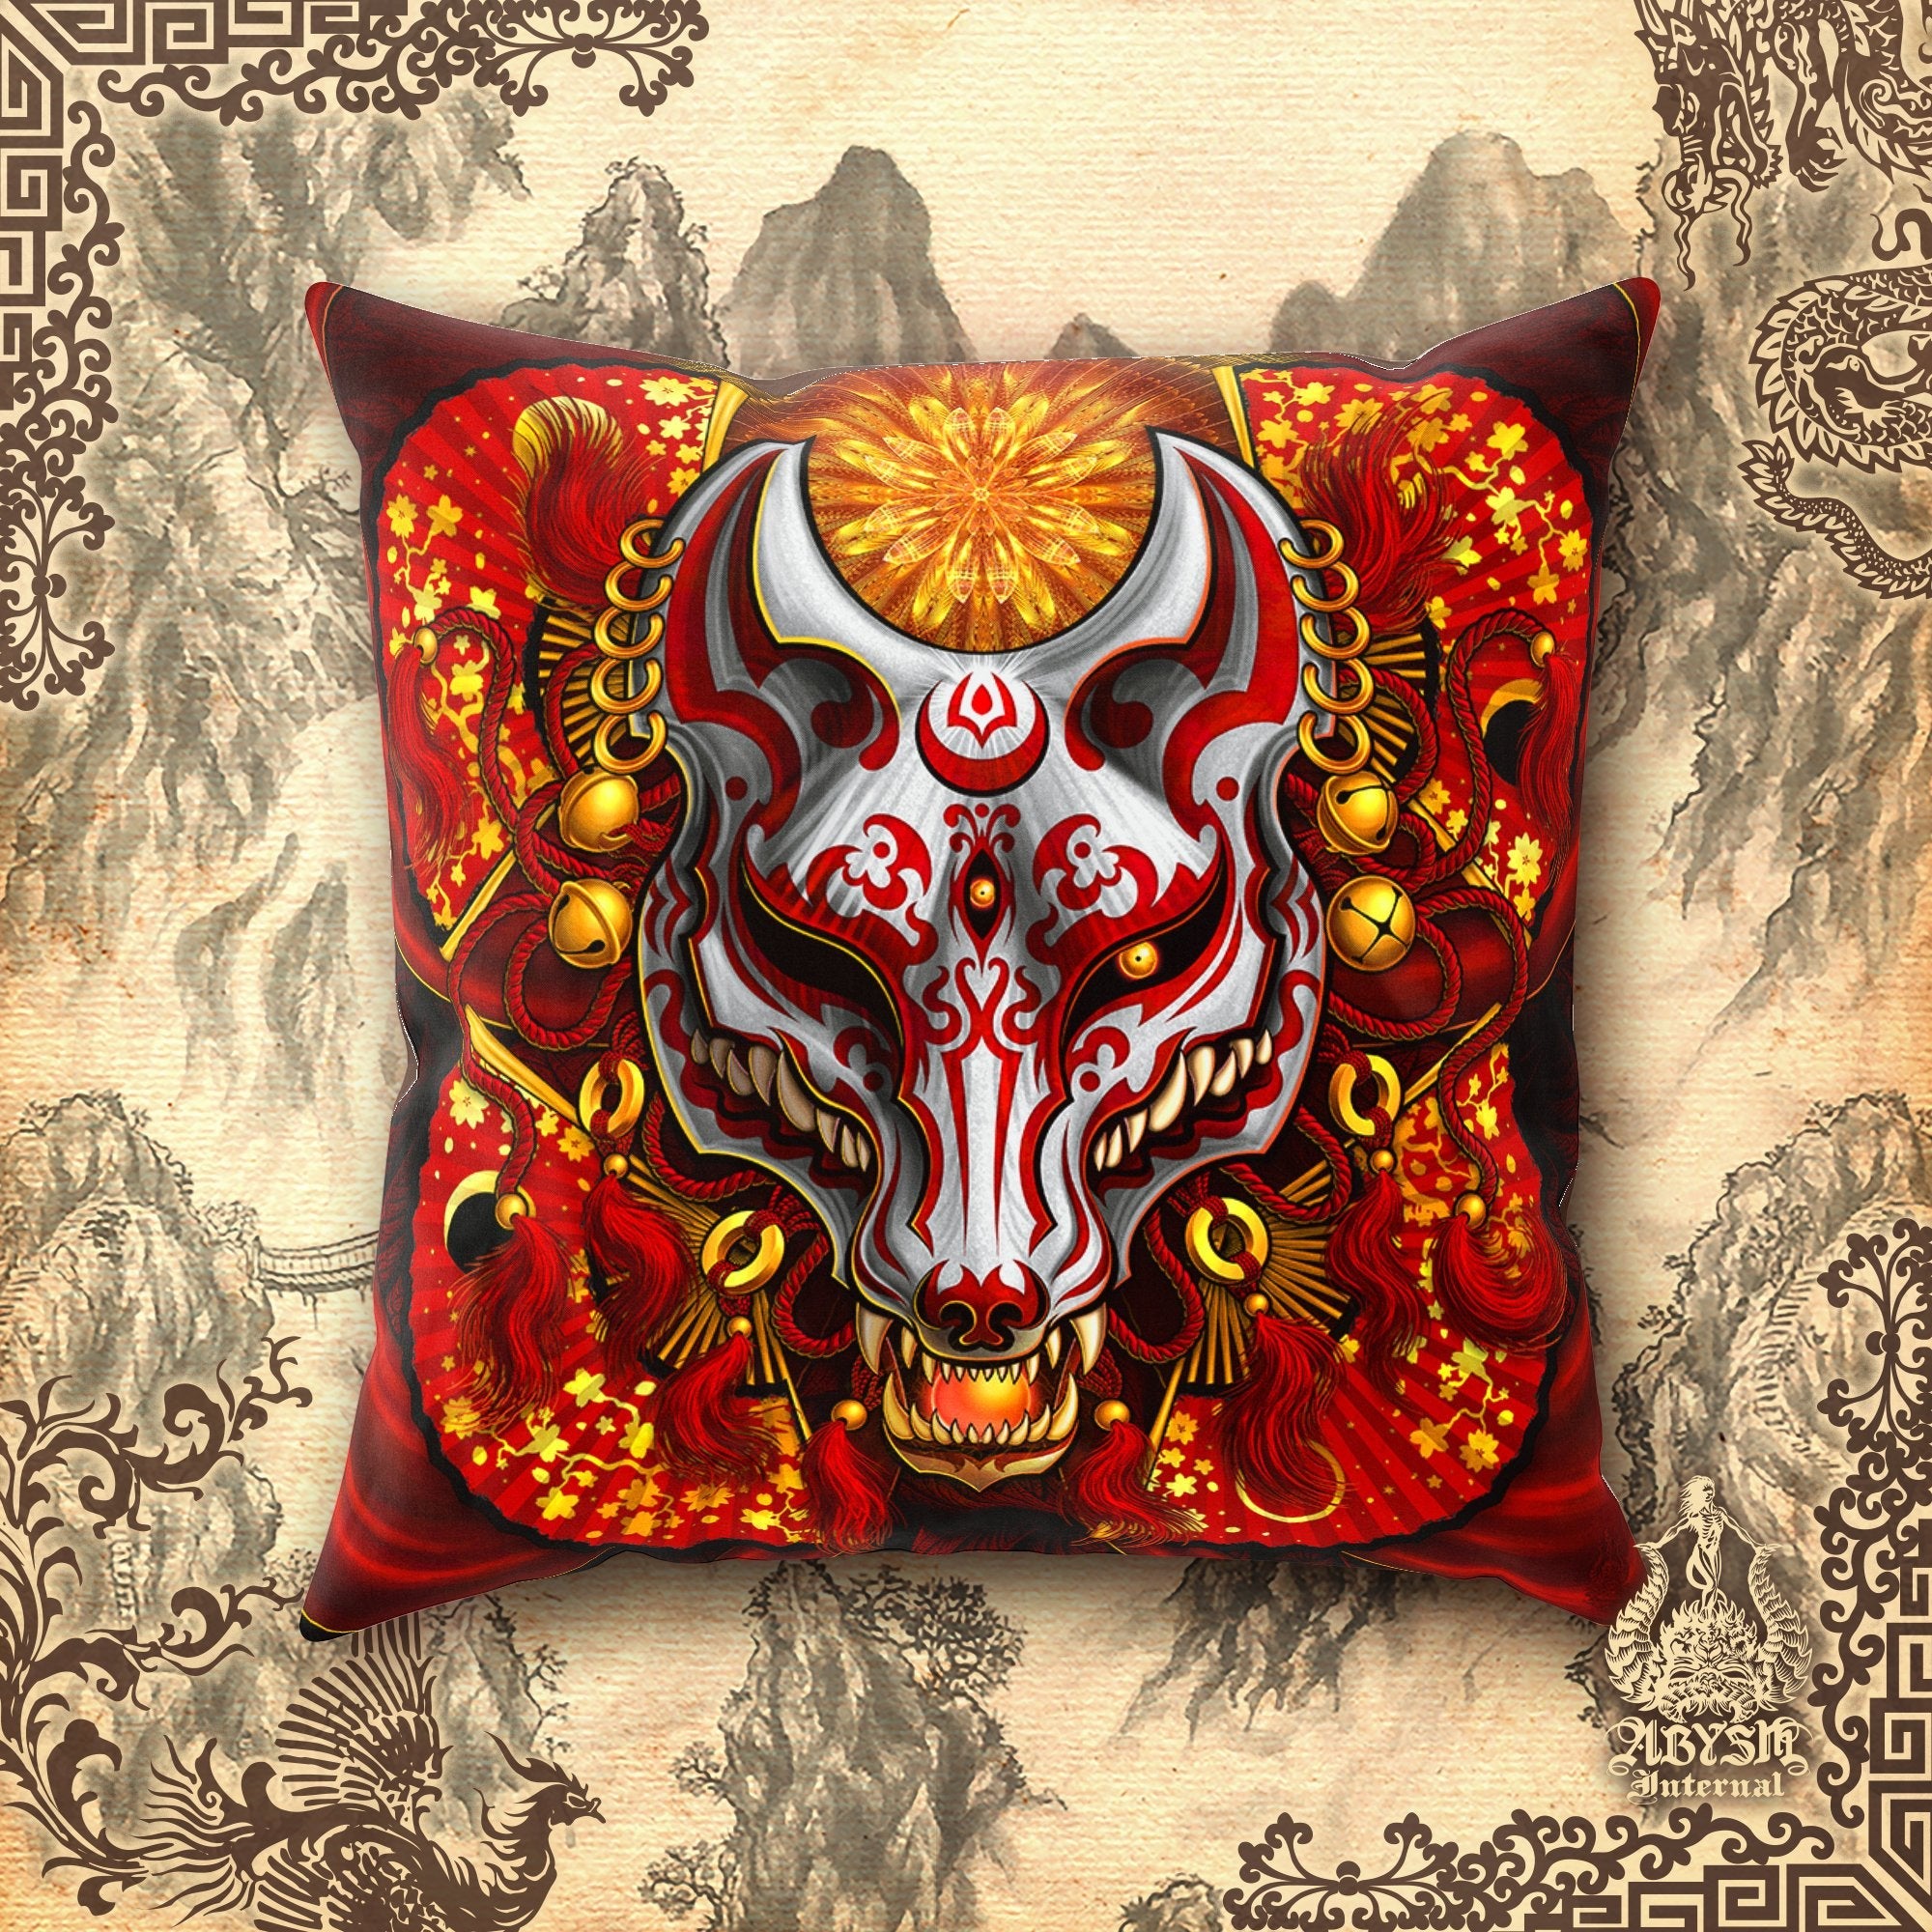 Kitsune Throw Pillow, Decorative Accent Cushion, Japanese Fox Mask, Okami, Anime and Gamer Room Decor, Funky and Eclectic Home - Red & White - Abysm Internal